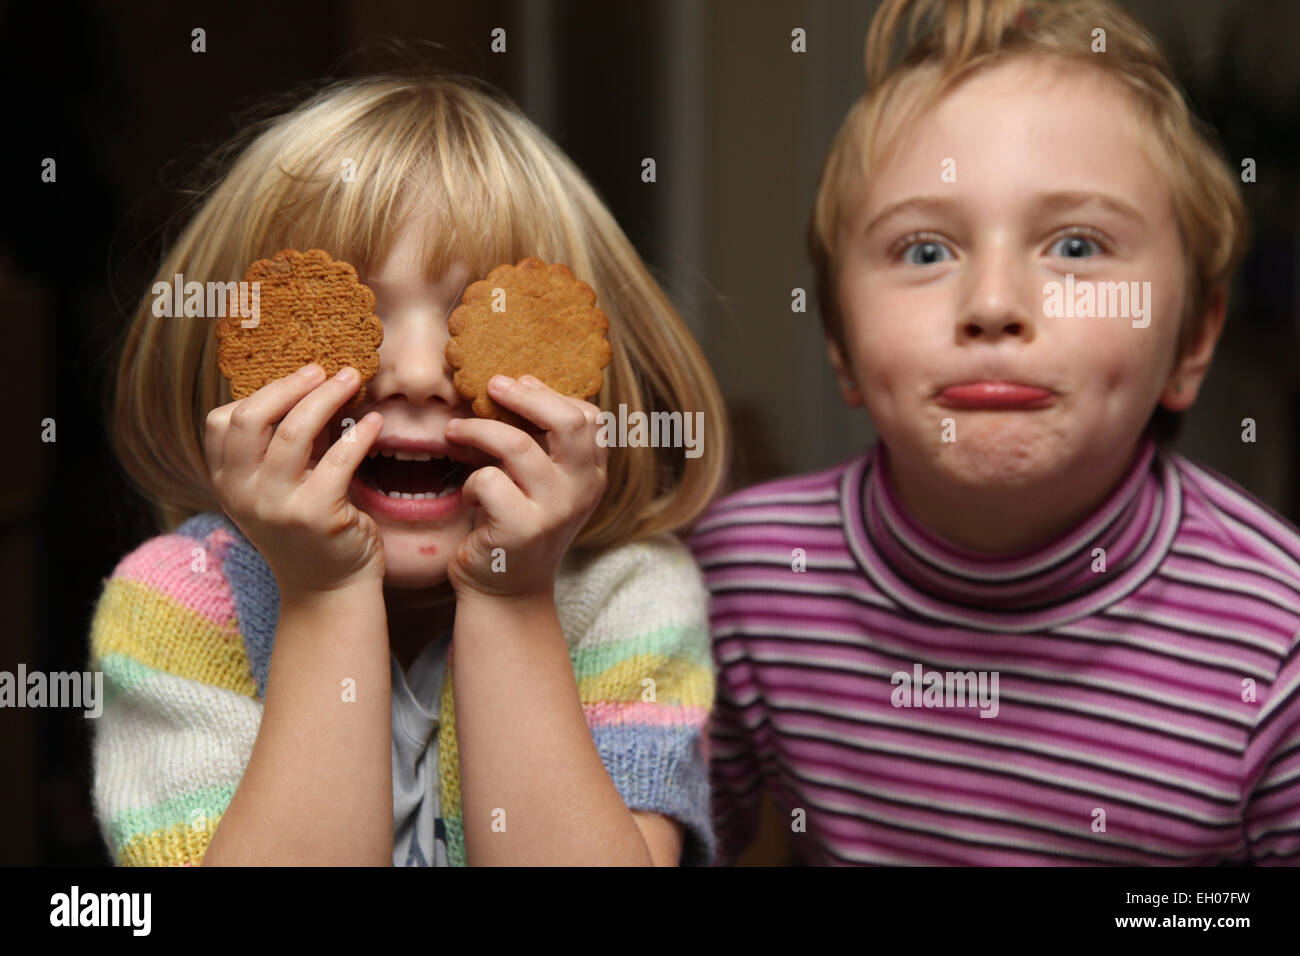 Children making funny faces - model released Stock Photo